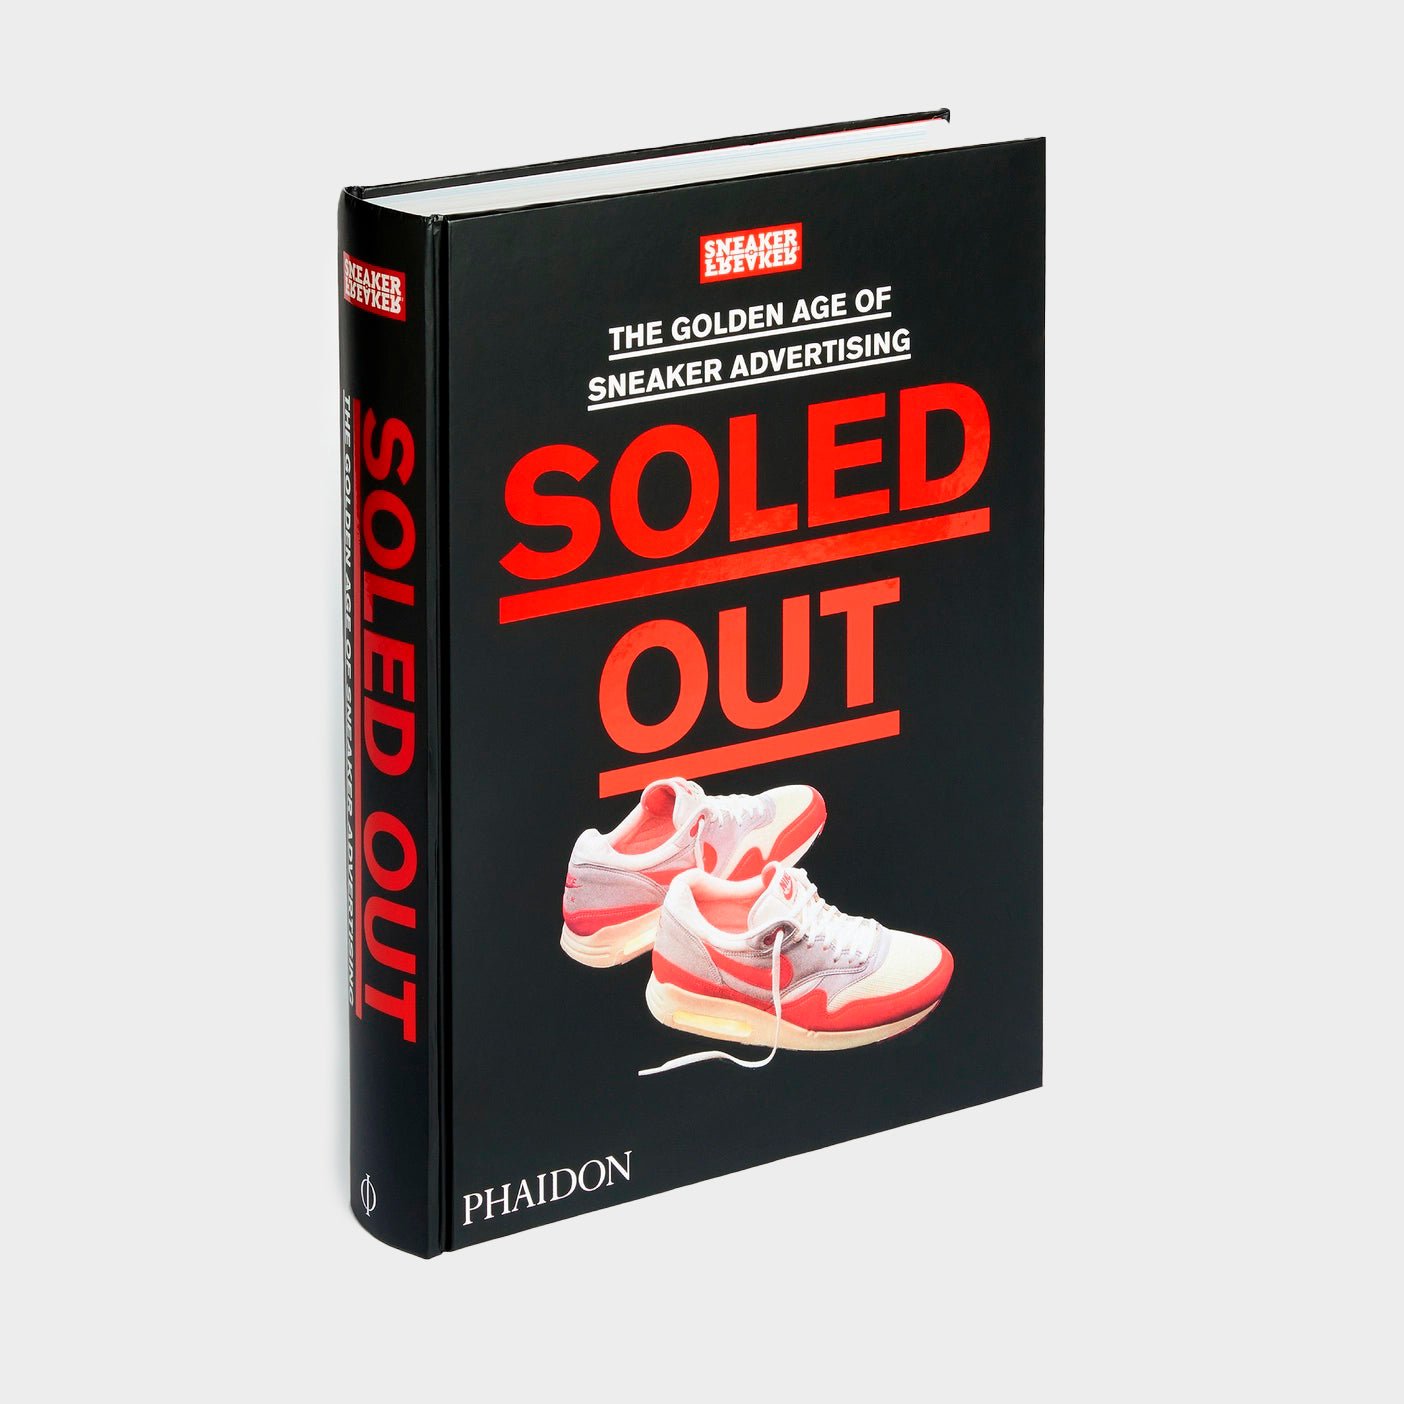 Phaidon "Soled Out" Book